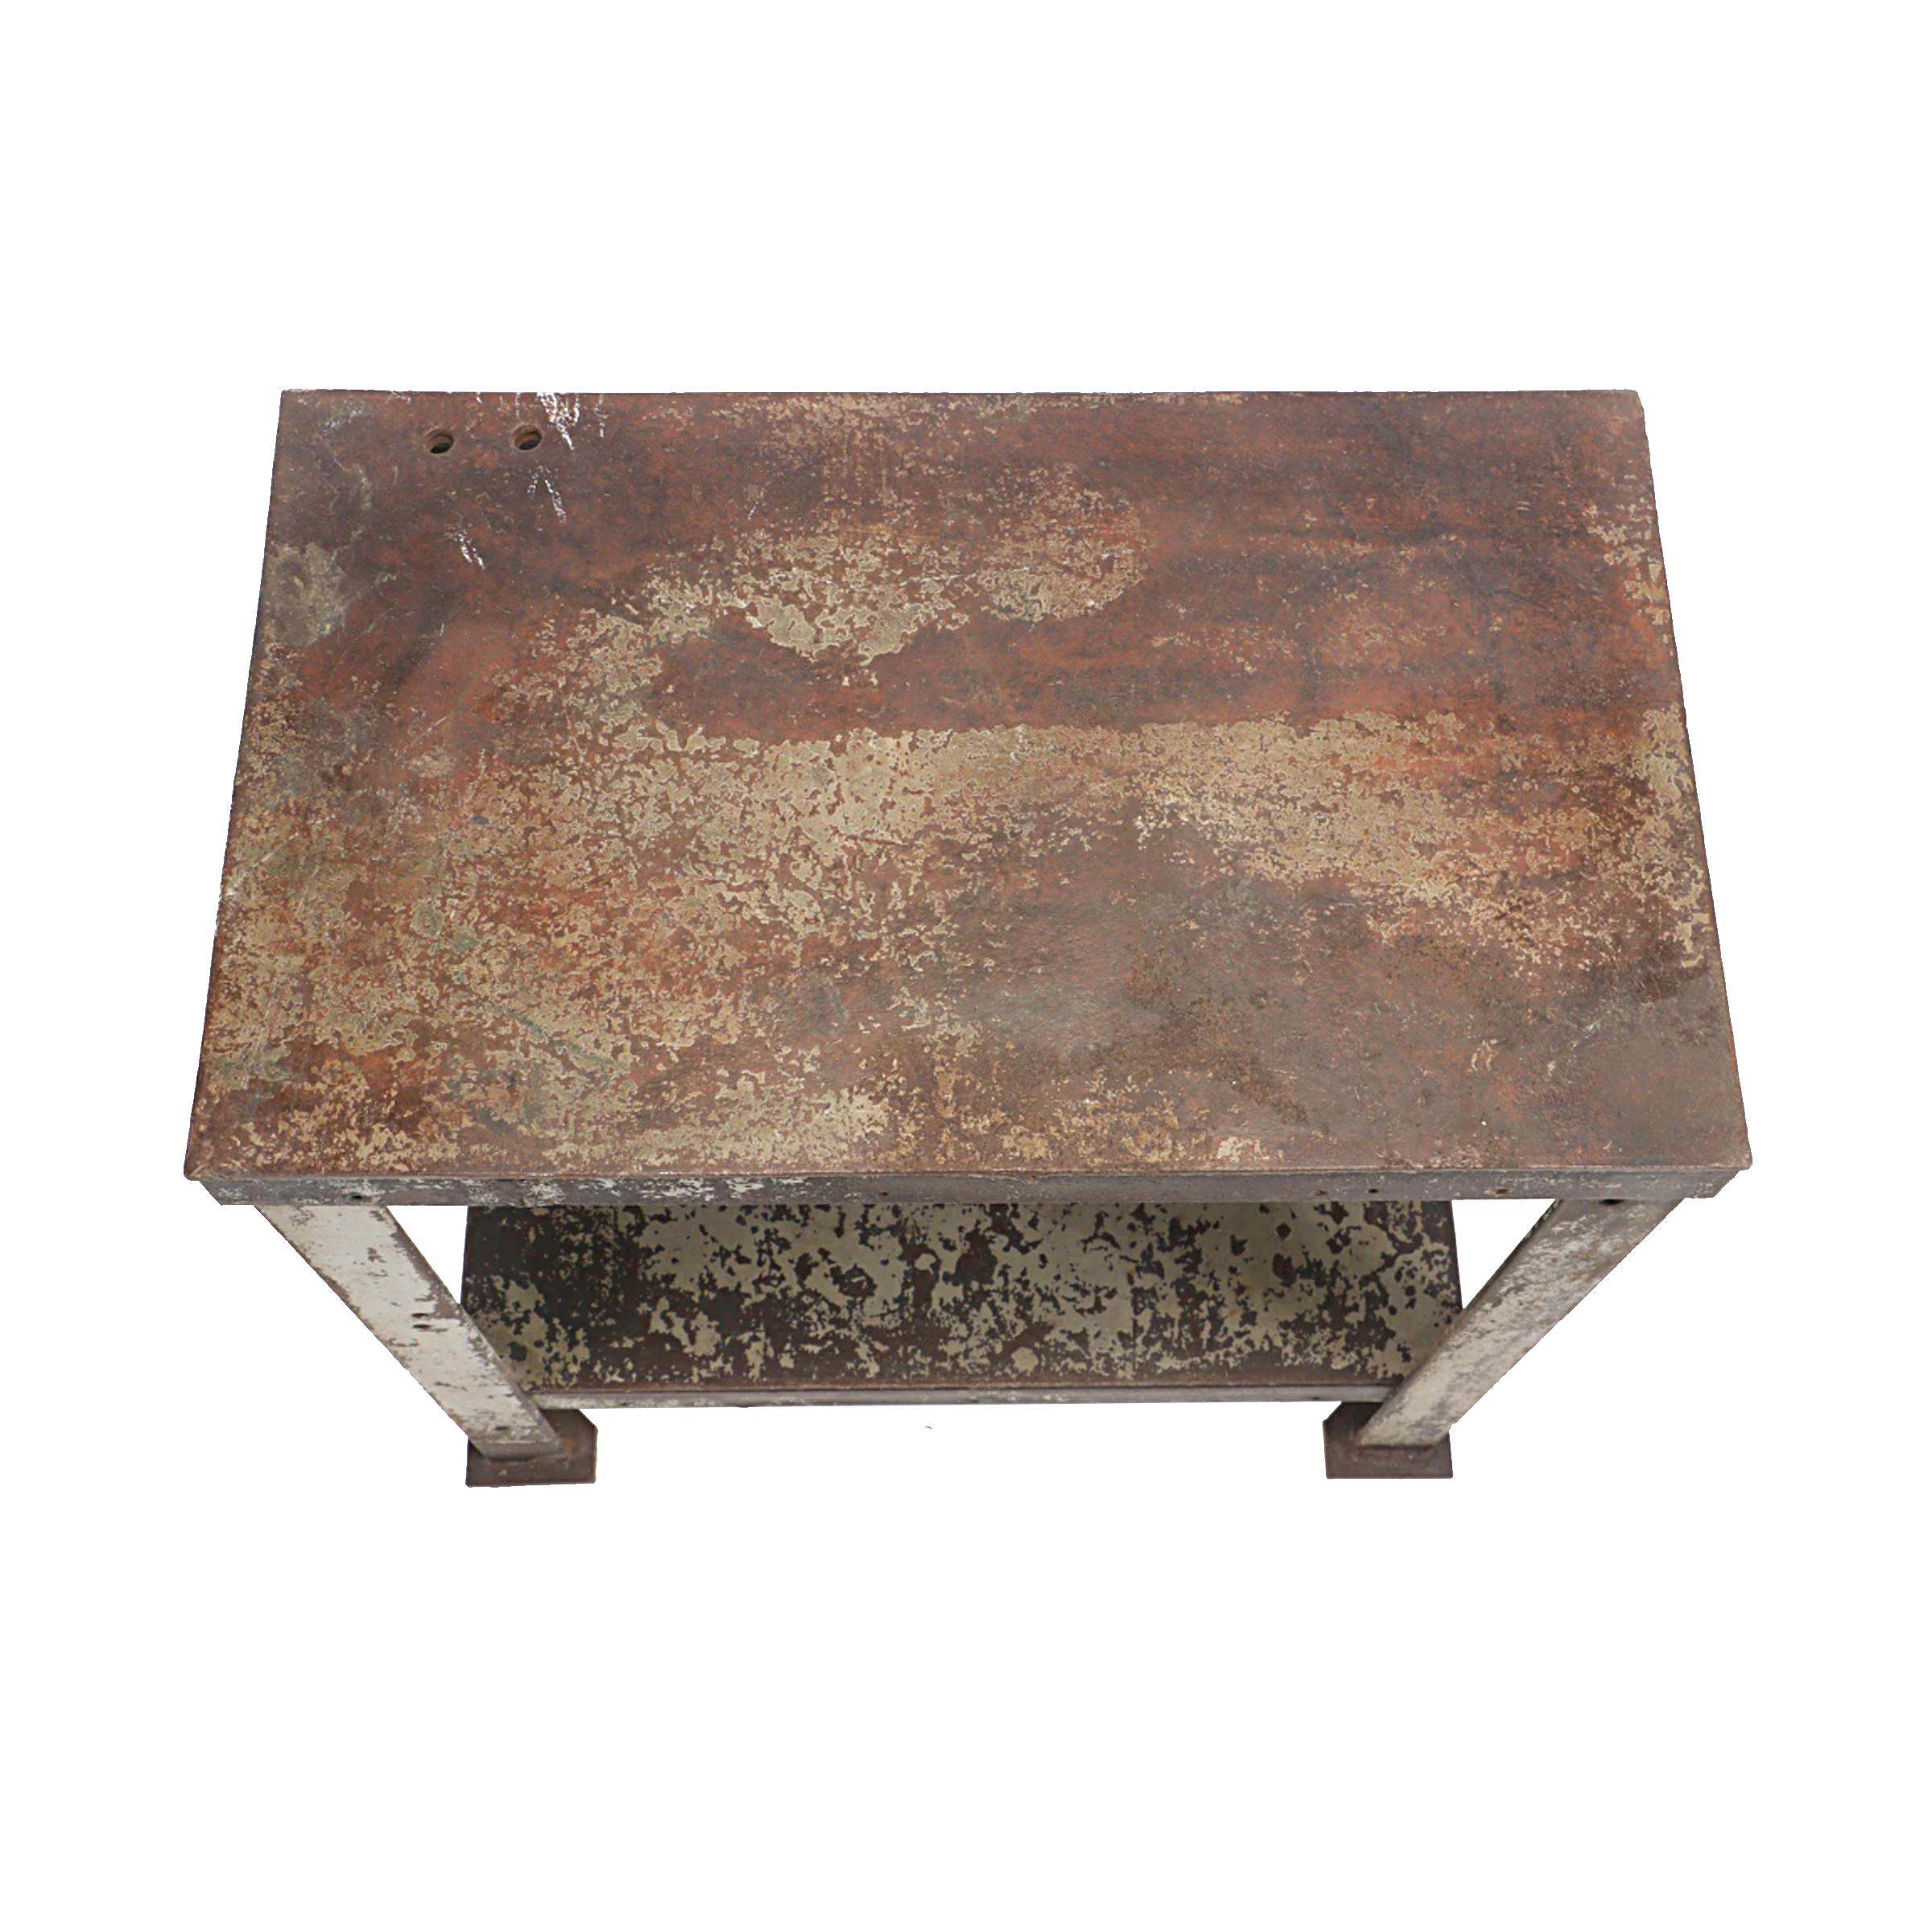 Steel Early 20th Century American Industrial Table